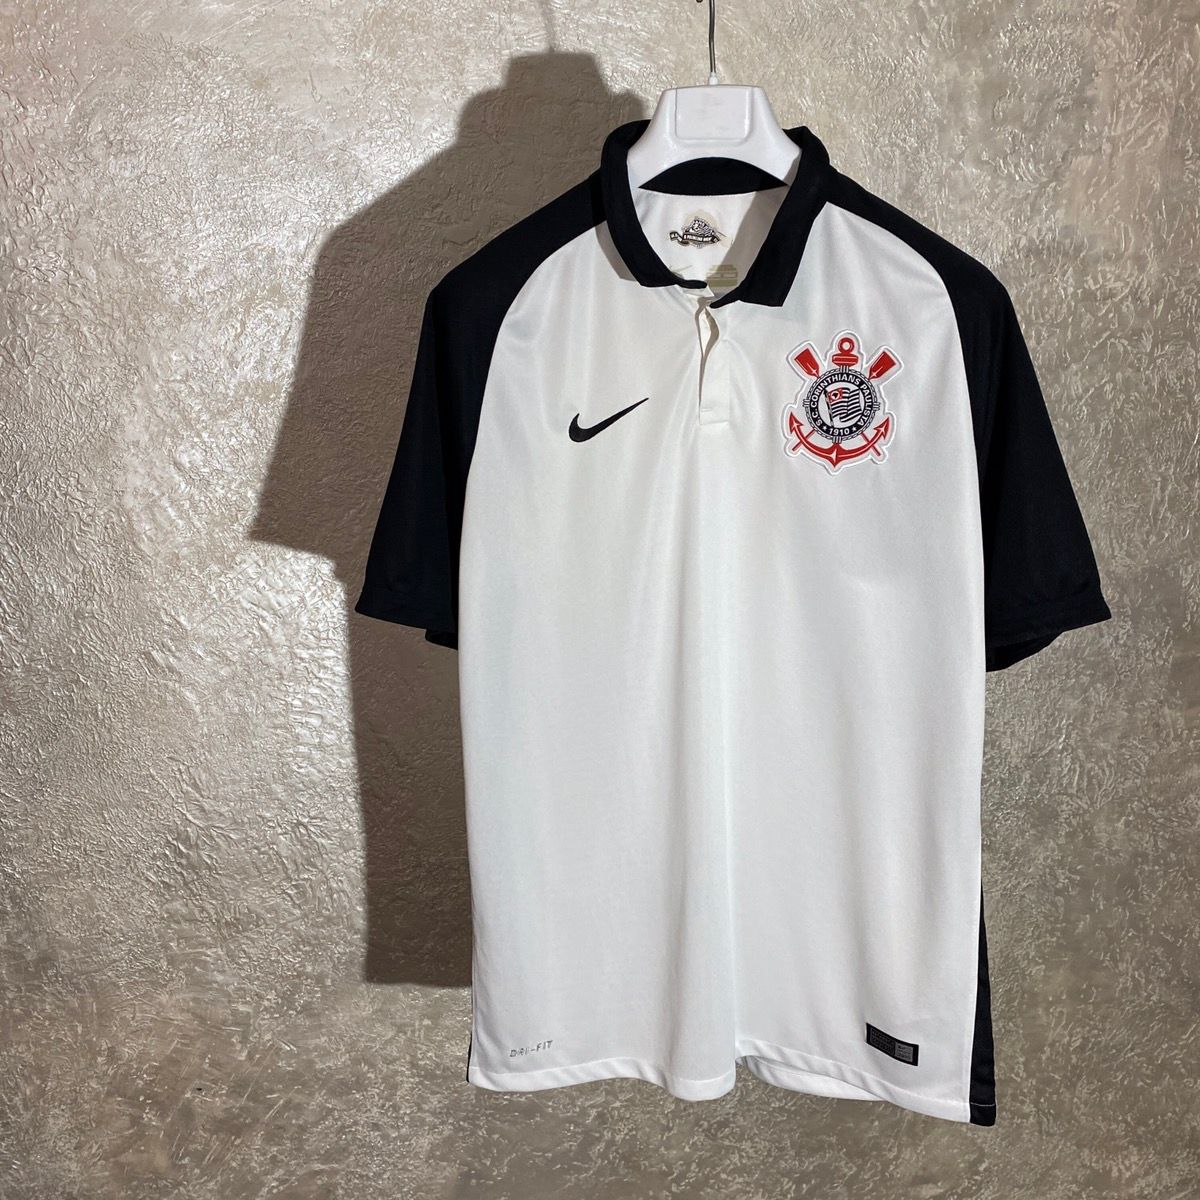 Pre-owned Nike X Soccer Jersey Nike X S.c. Corinthians 2015 Home Football Shirt Kit In White